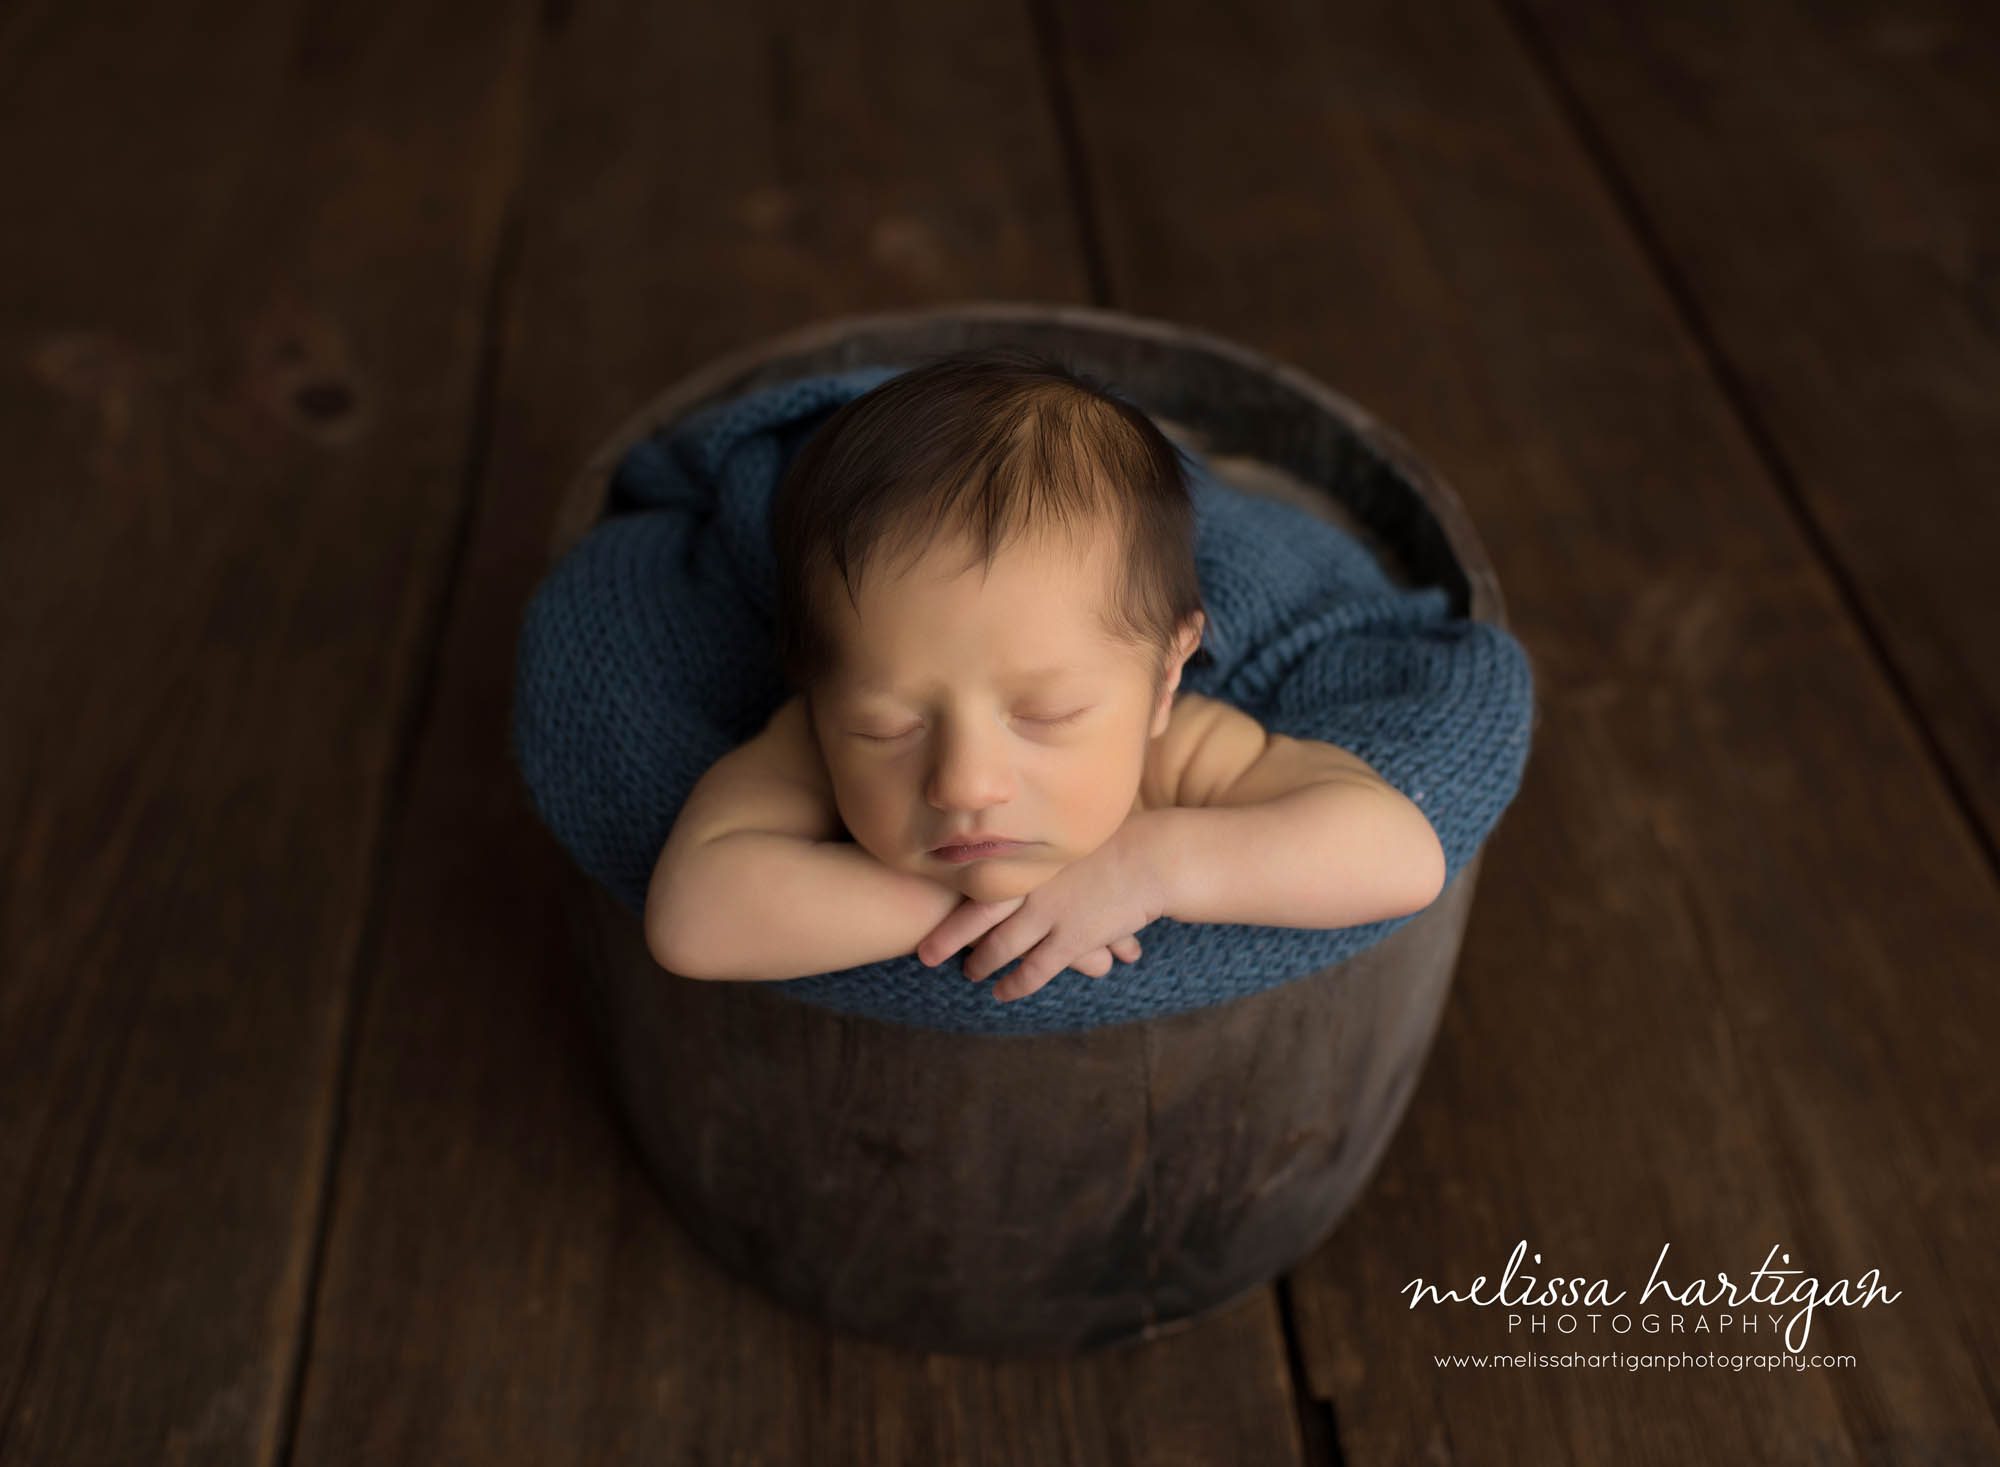 Melissa Hartigan Photography Maternity and Newborn Connecticut Photographer Brayden Mini Newborn Session Baby boy sleeping in wooden bowl with blue knit blanket